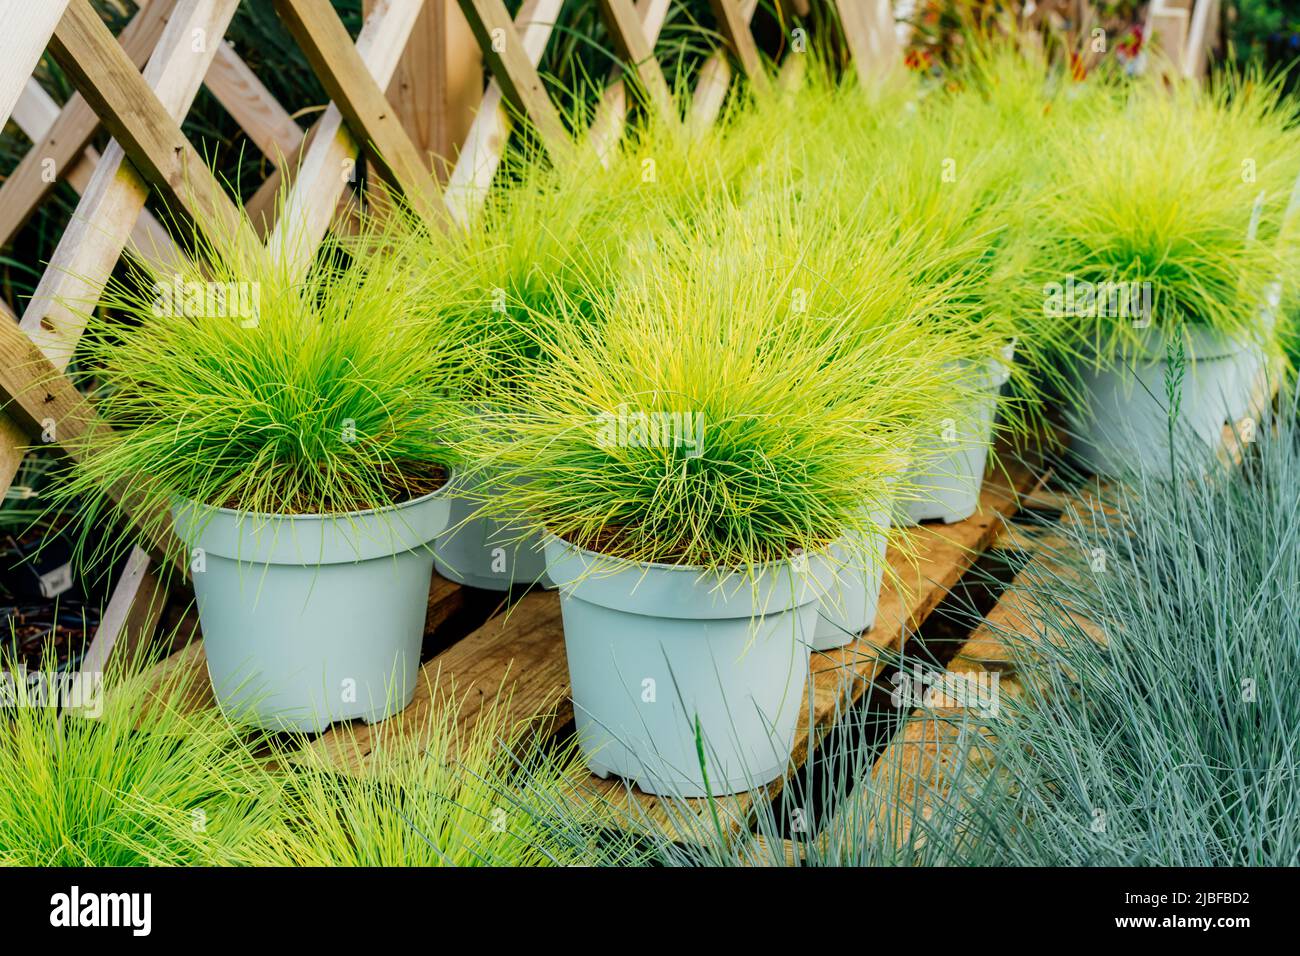 Seedlings in pots Festuca glauca green and yellow grass in plant pots in the garden center. Ideas for gardening and planting in a new season. Selectiv Stock Photo